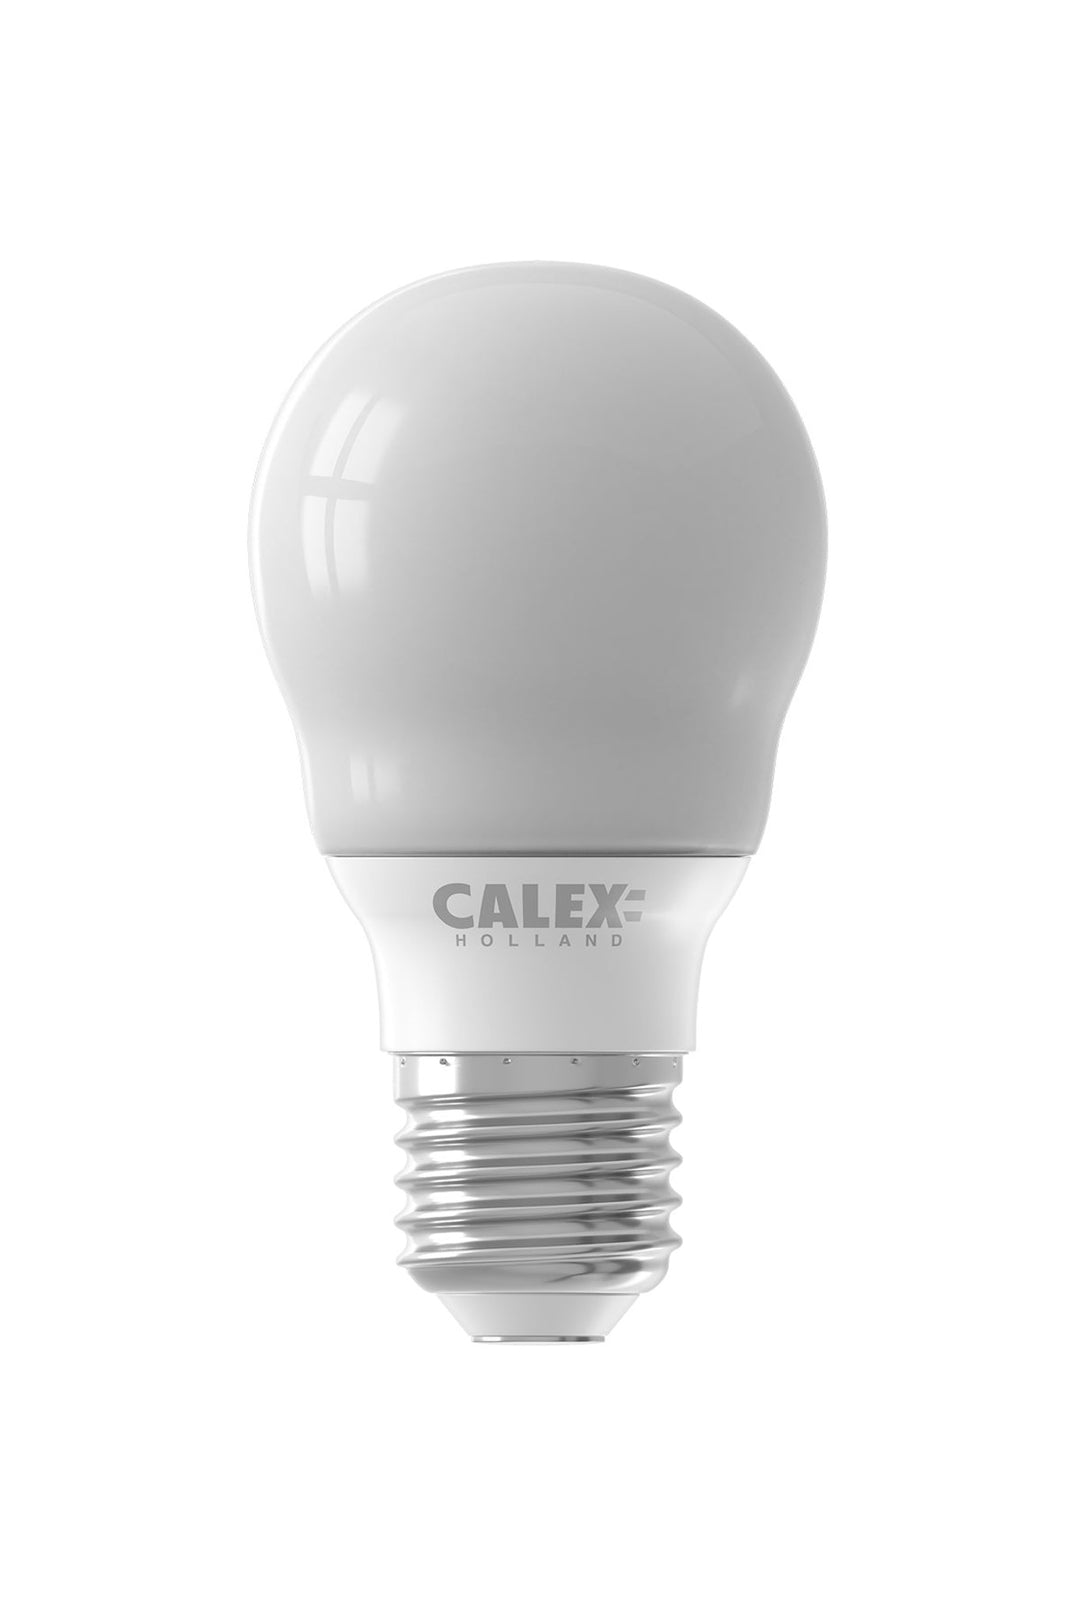 Calex LED SMD GLS Lamp A60, Flame, E27, Non-Dimmable 1301006400